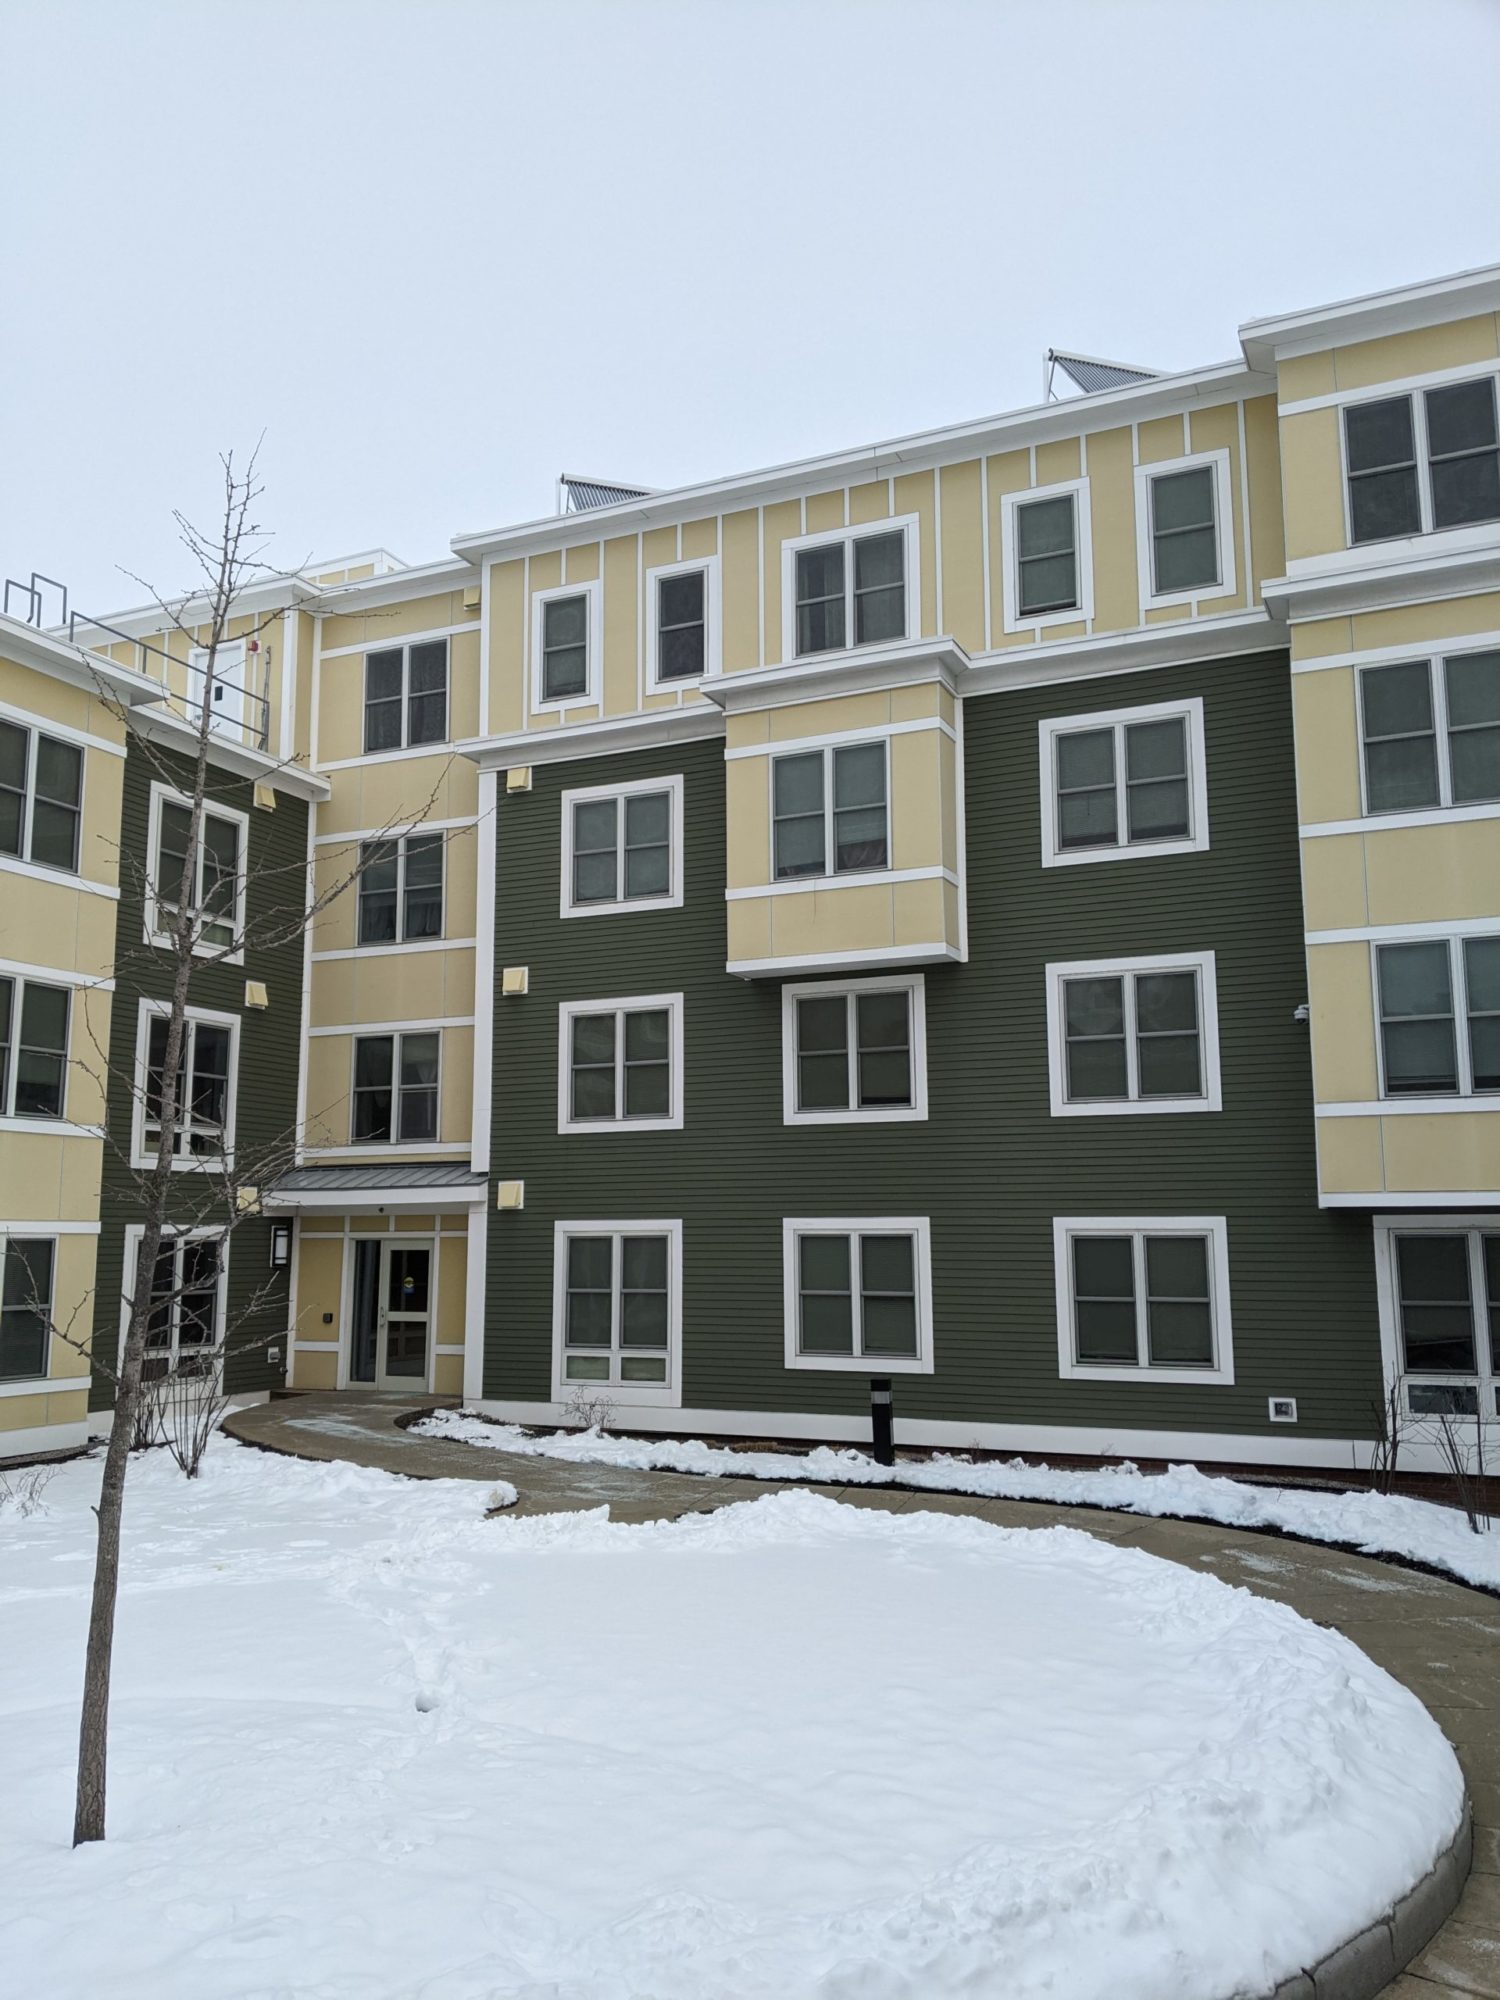 An angled view of an apartment building. A curved side walk cuts through the courtyard covered in snow. The sidewalk has been shoveled of snow. The building is a muted yellow and an olive green. It is unclear how many apartments are in view. There are two entrance doors and many windows in view.